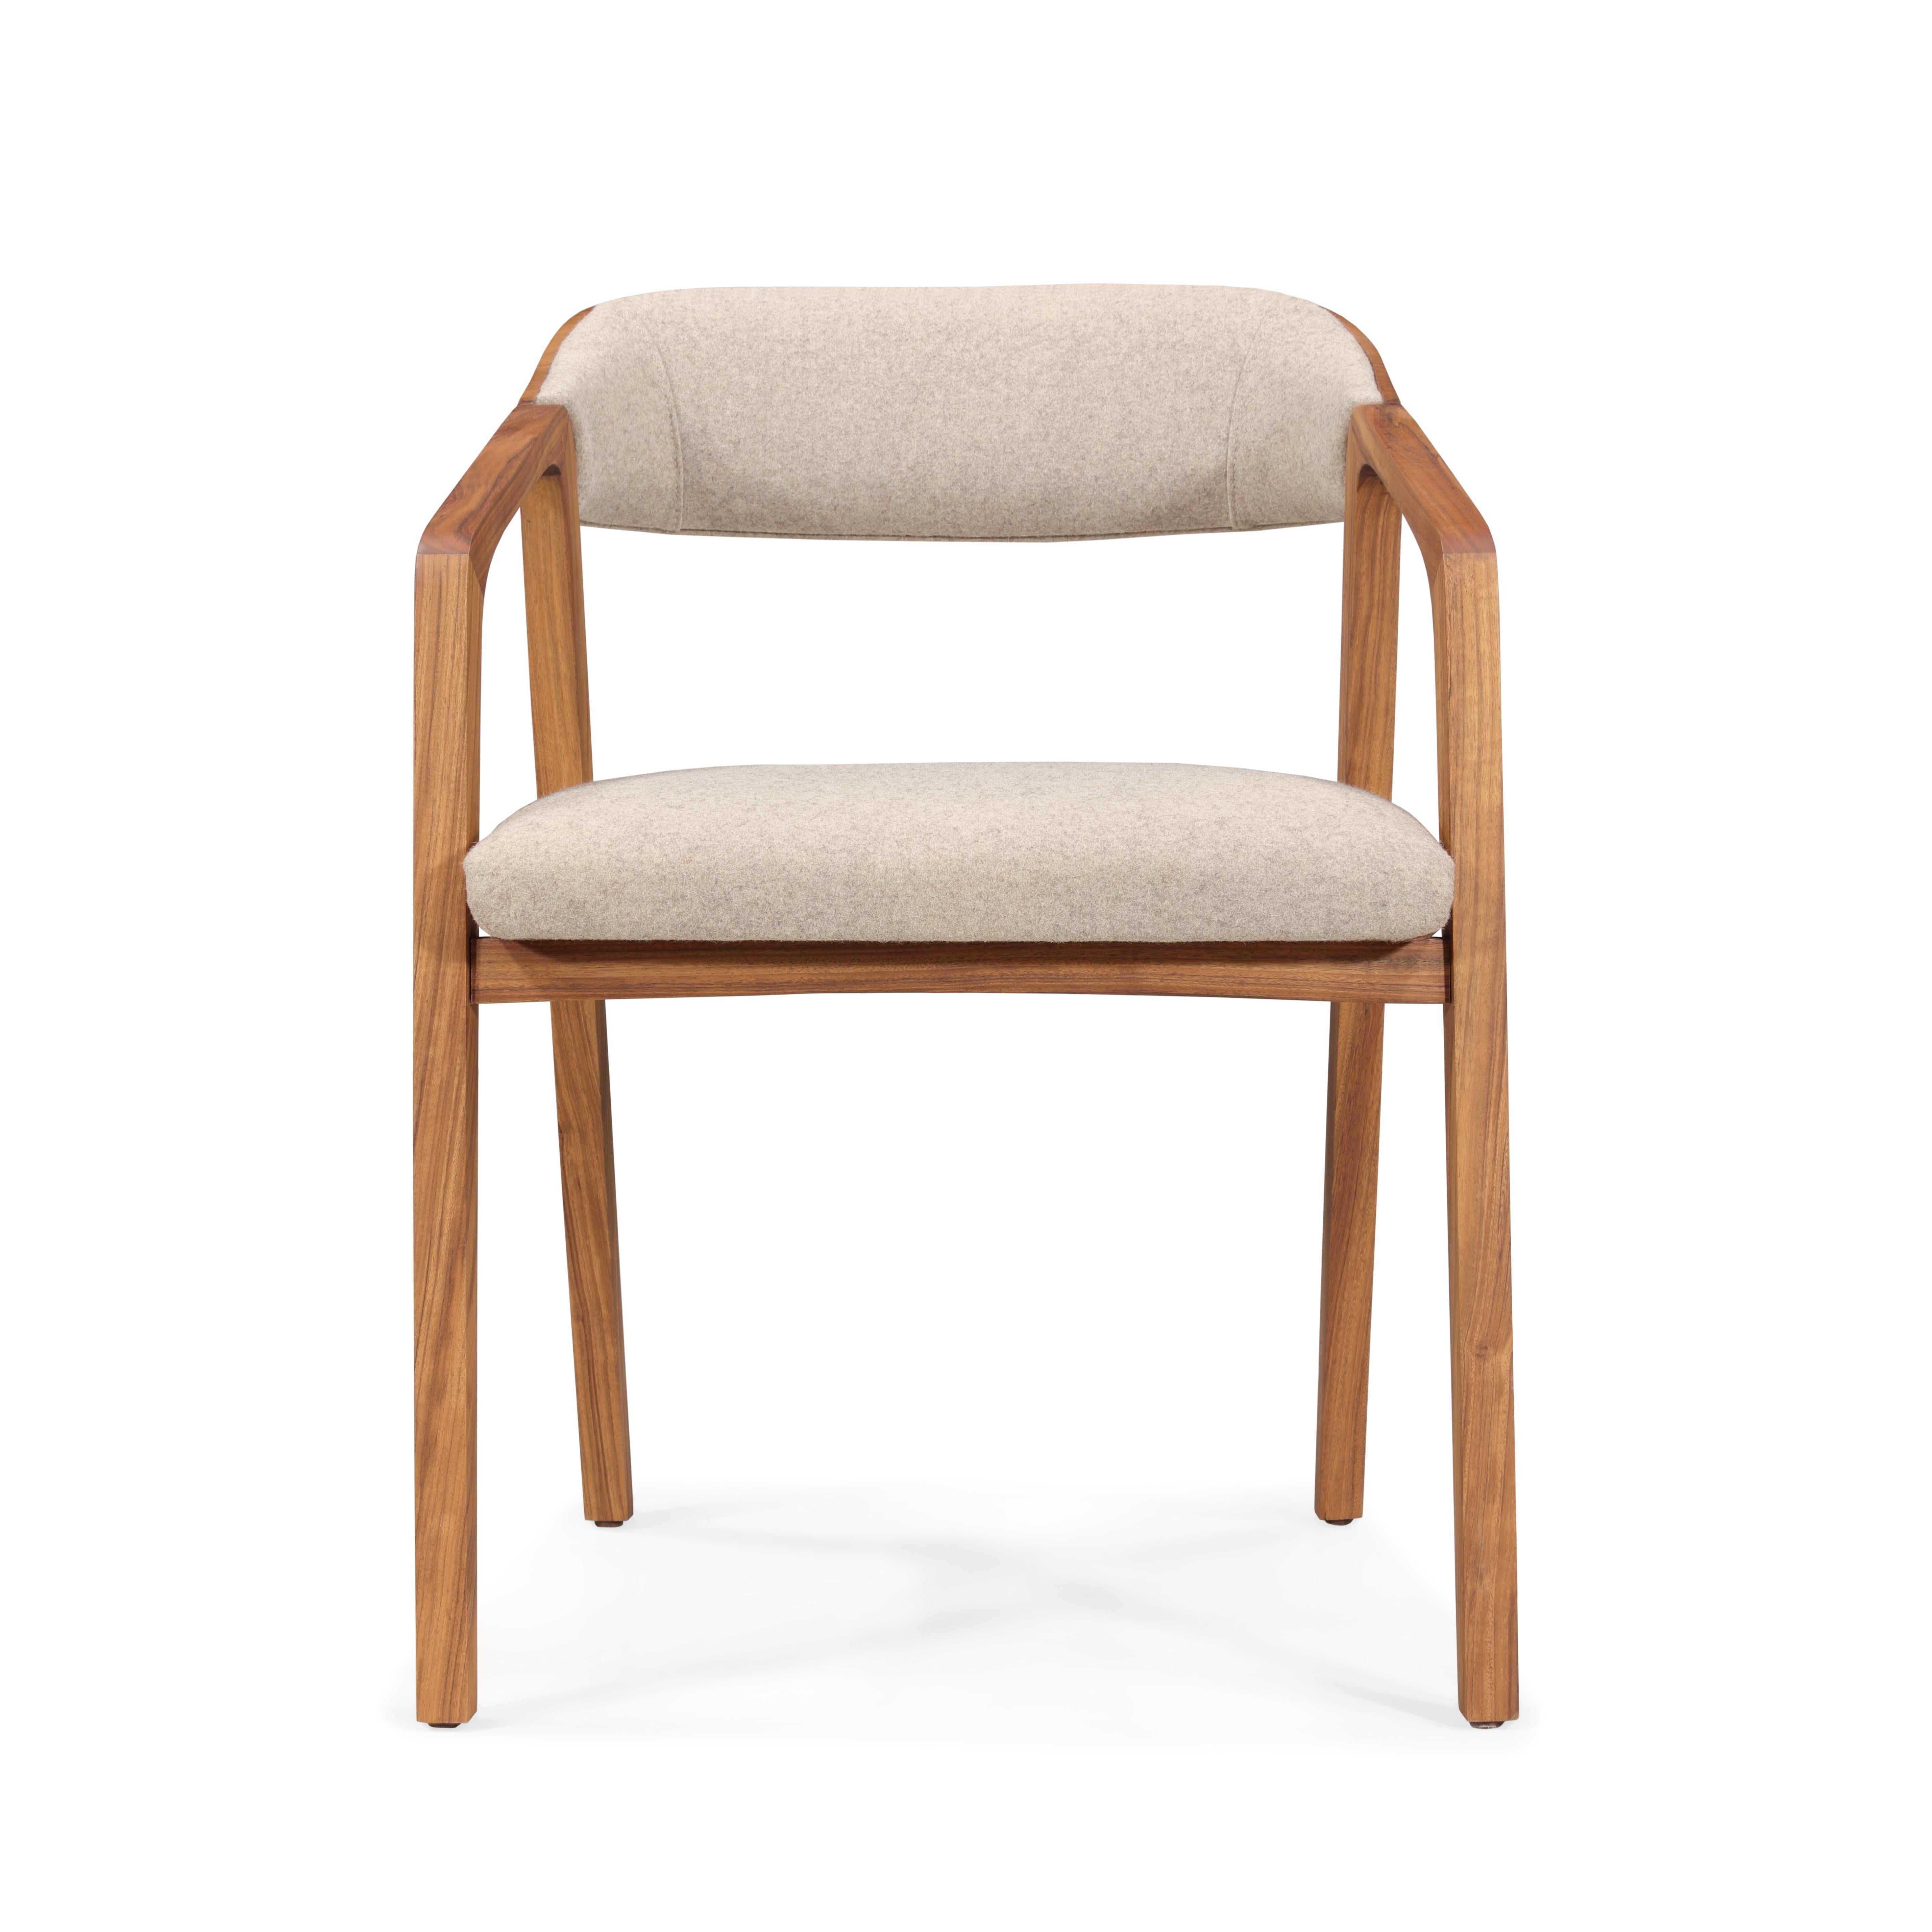 The Slomo chair is based on the principles of the idea of chair that is familiar to us, combining different details that revive the memory of shapes from 20th century designs. Designed to be pleasing to the eye with its fluid shapes when viewed from